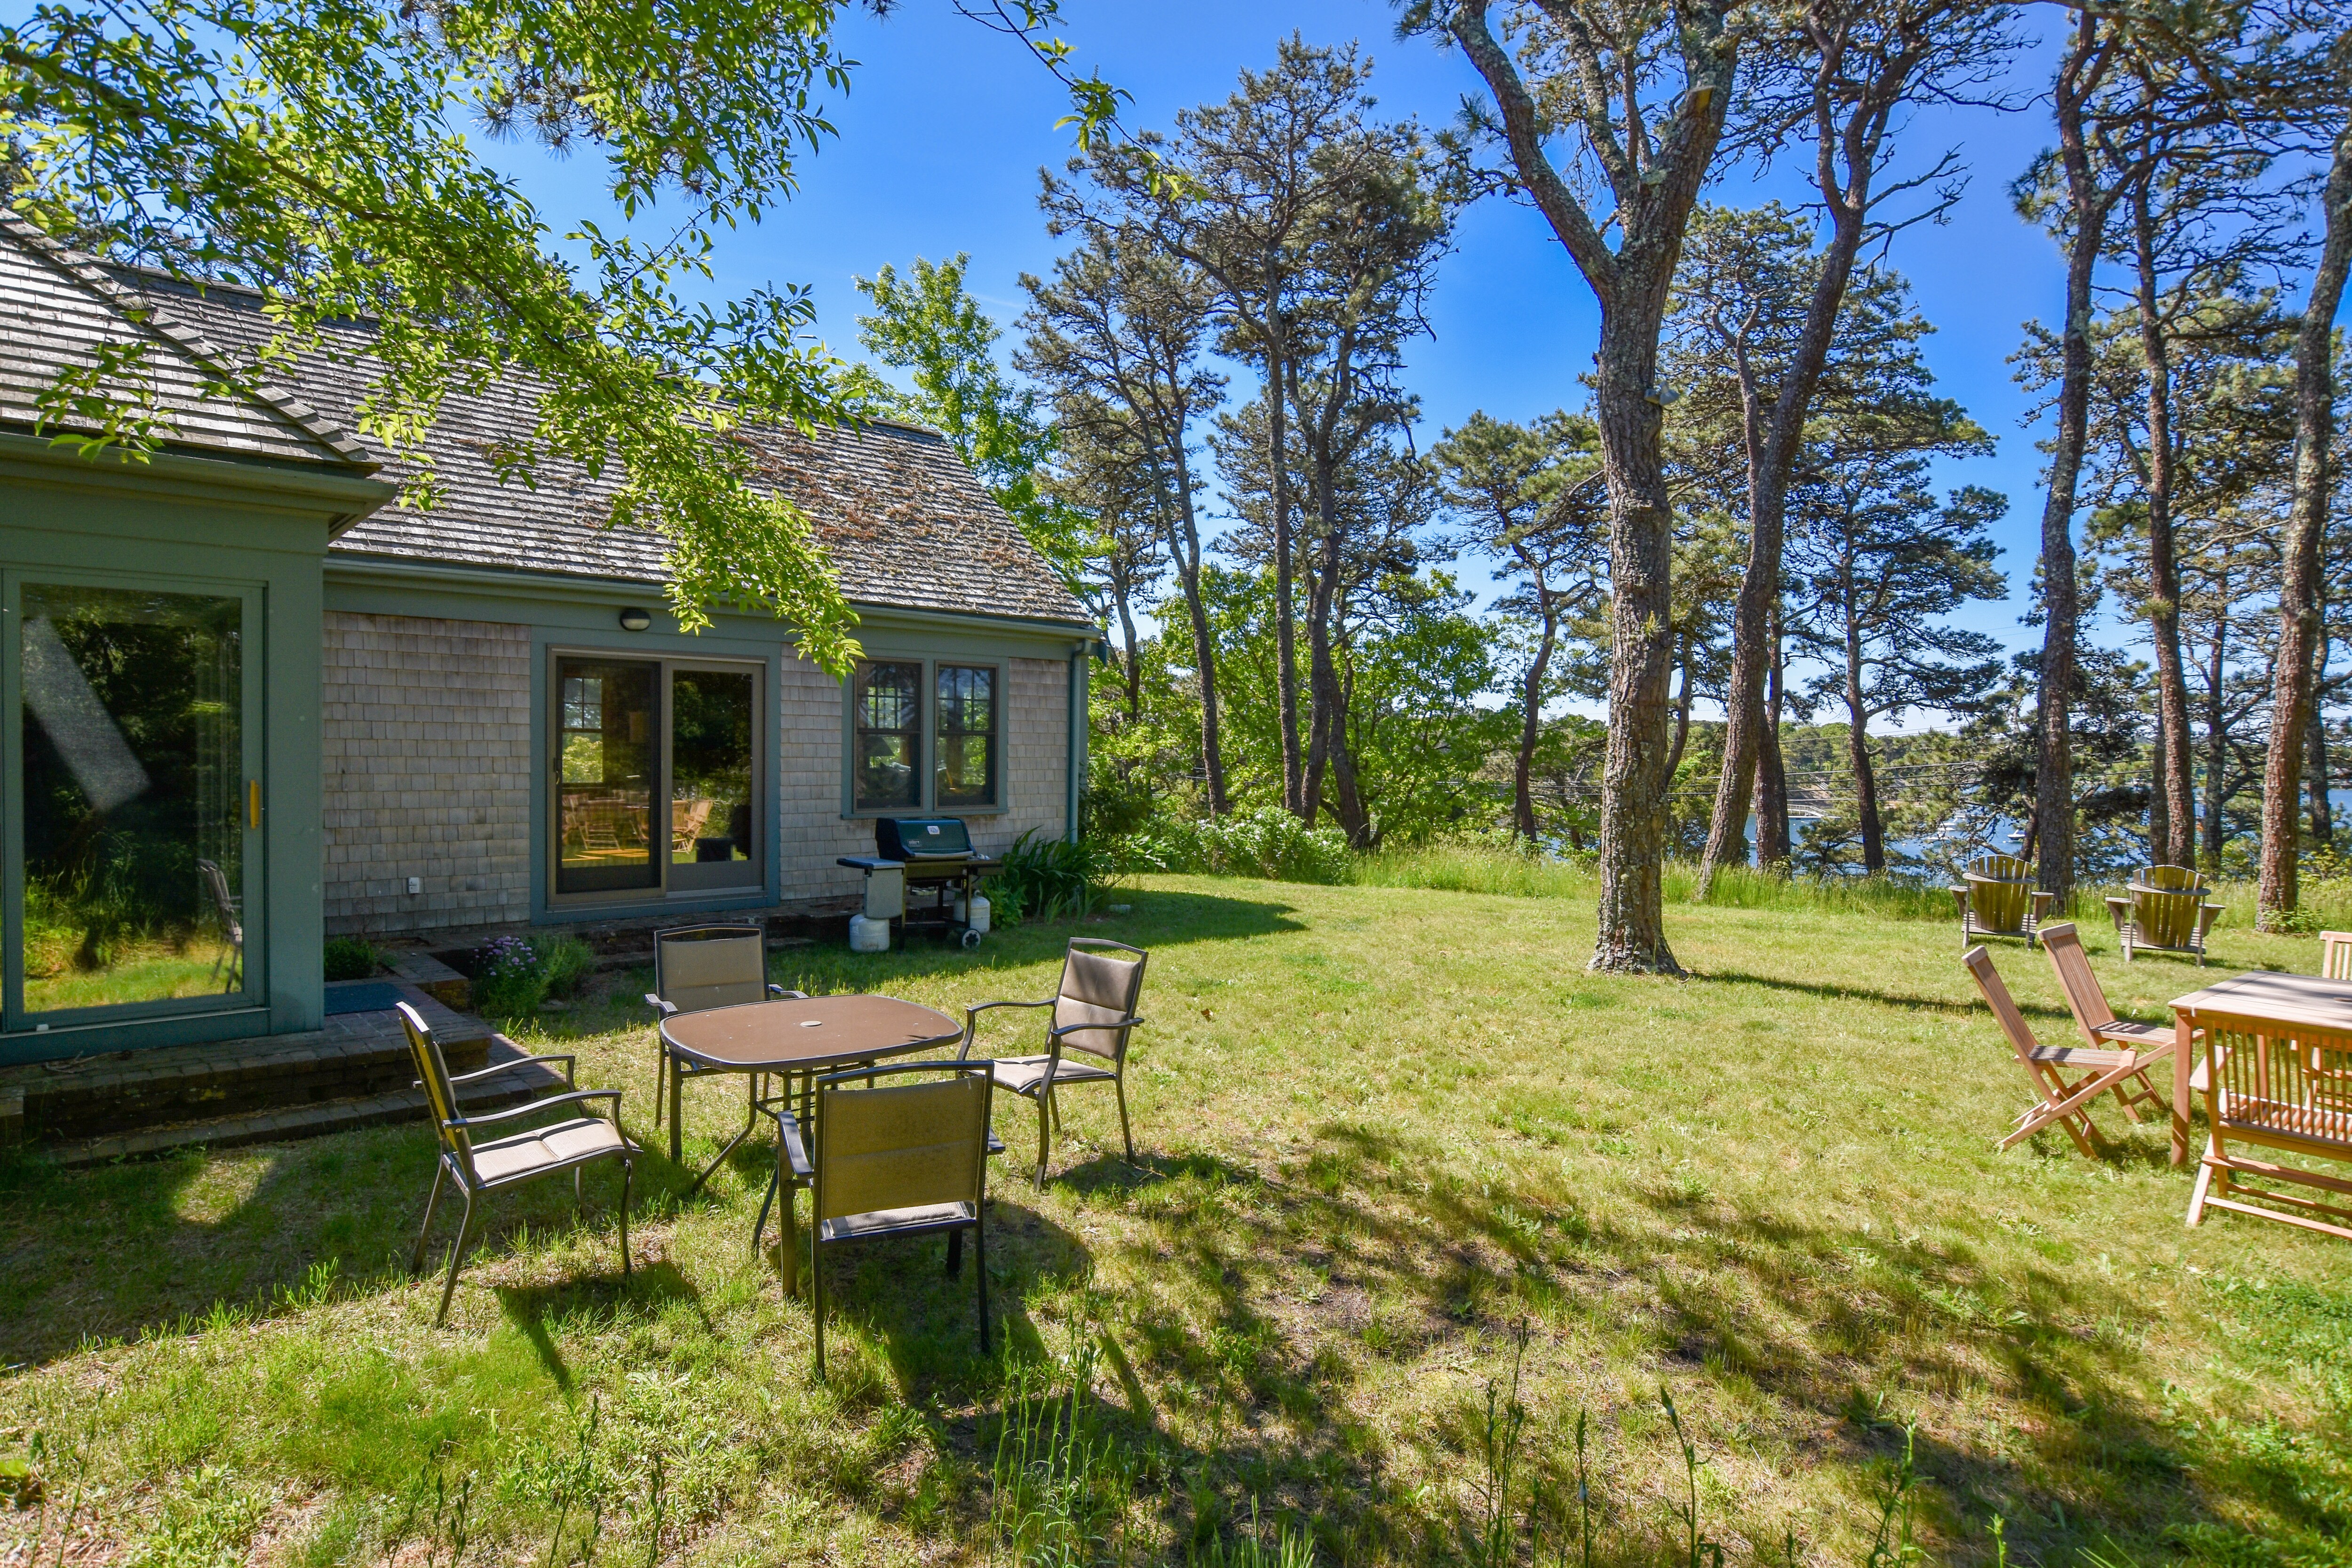 Property Image 2 - 16624: Waterfront, Deeded Beach Access, Private, Views of Natural Landscape!